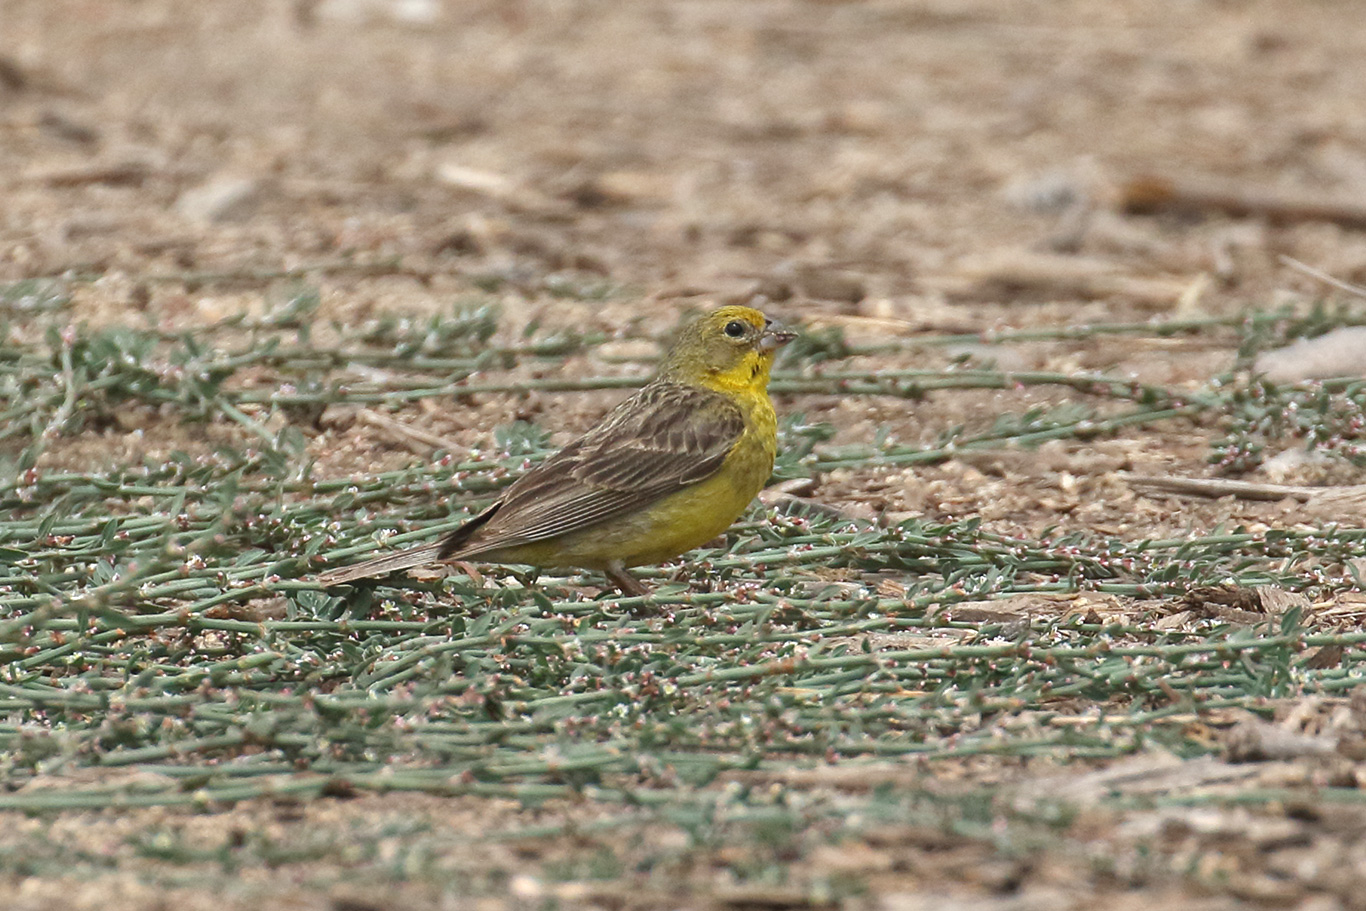 Grassland Yellow Finch, Parque Humedal Río Maípo, Chile.